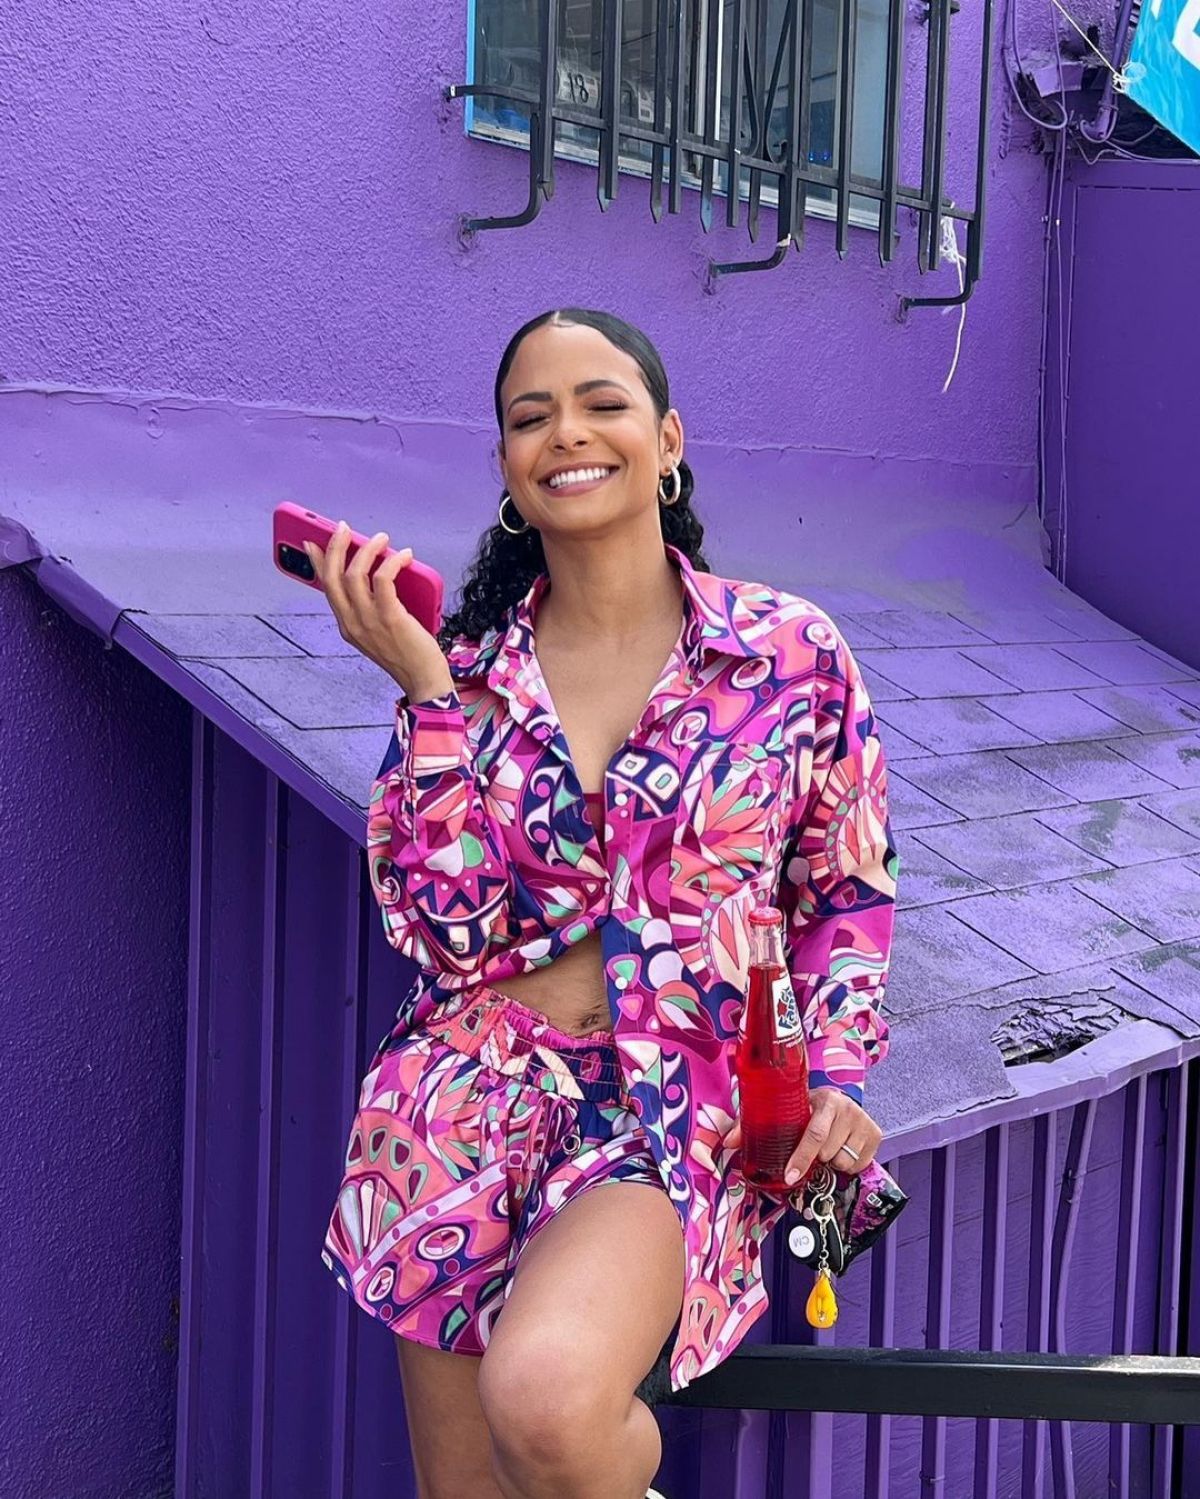 Christina Milian in a stylish floral dress against a purple wall